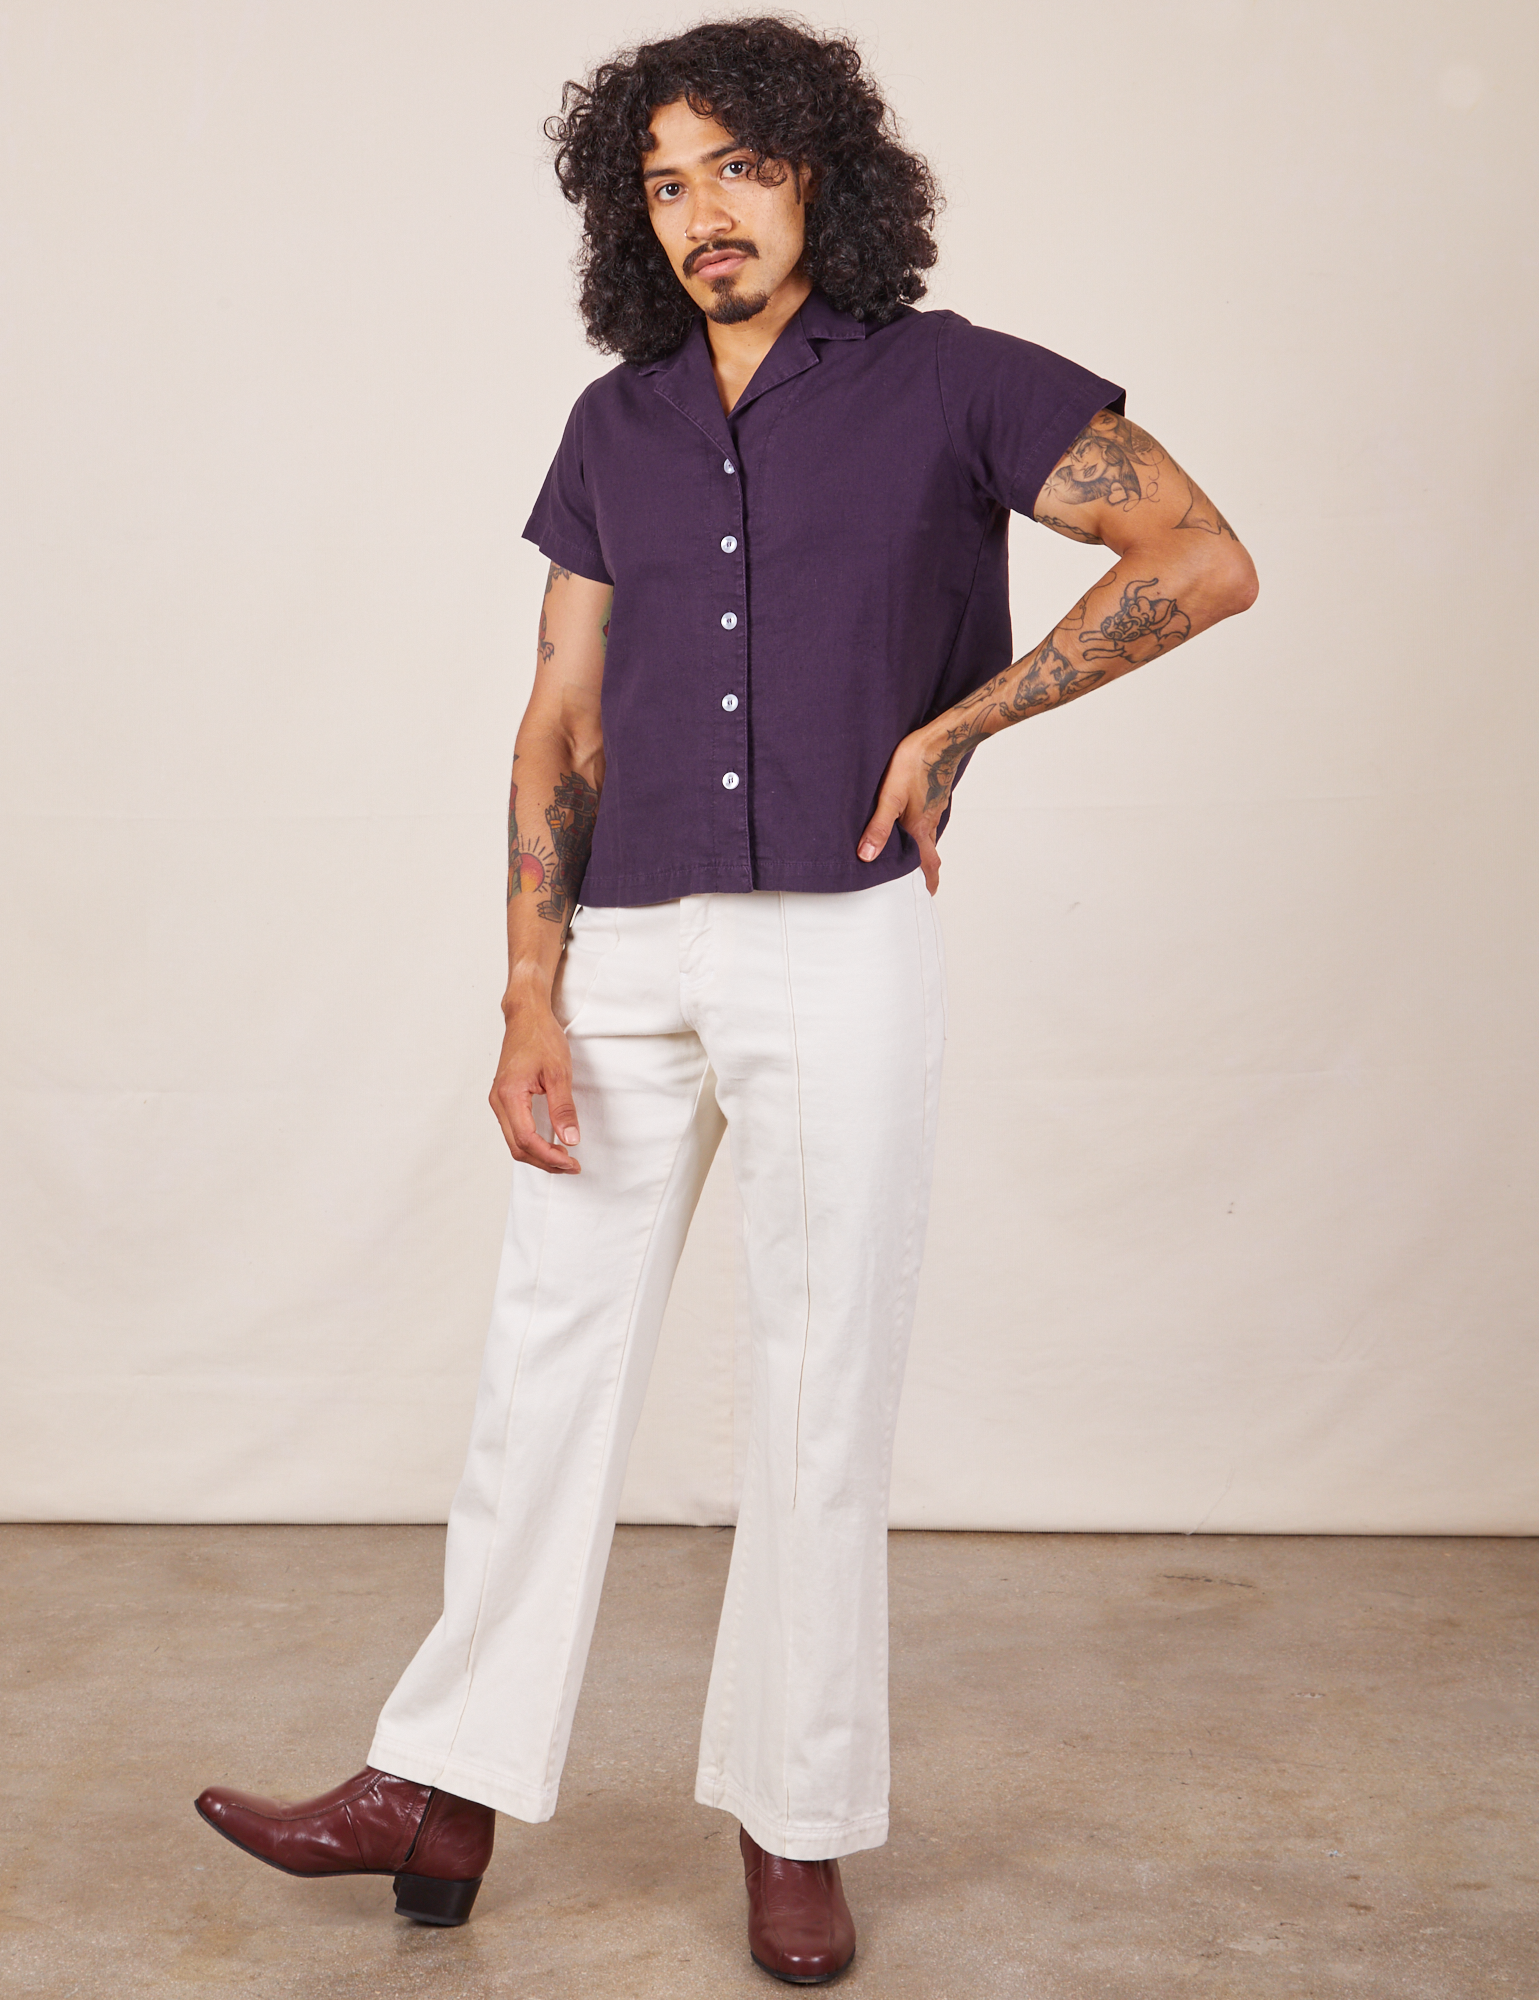 Jesse is wearing Pantry Button-Up in Nebula Purple and vintage off-white Western Pants